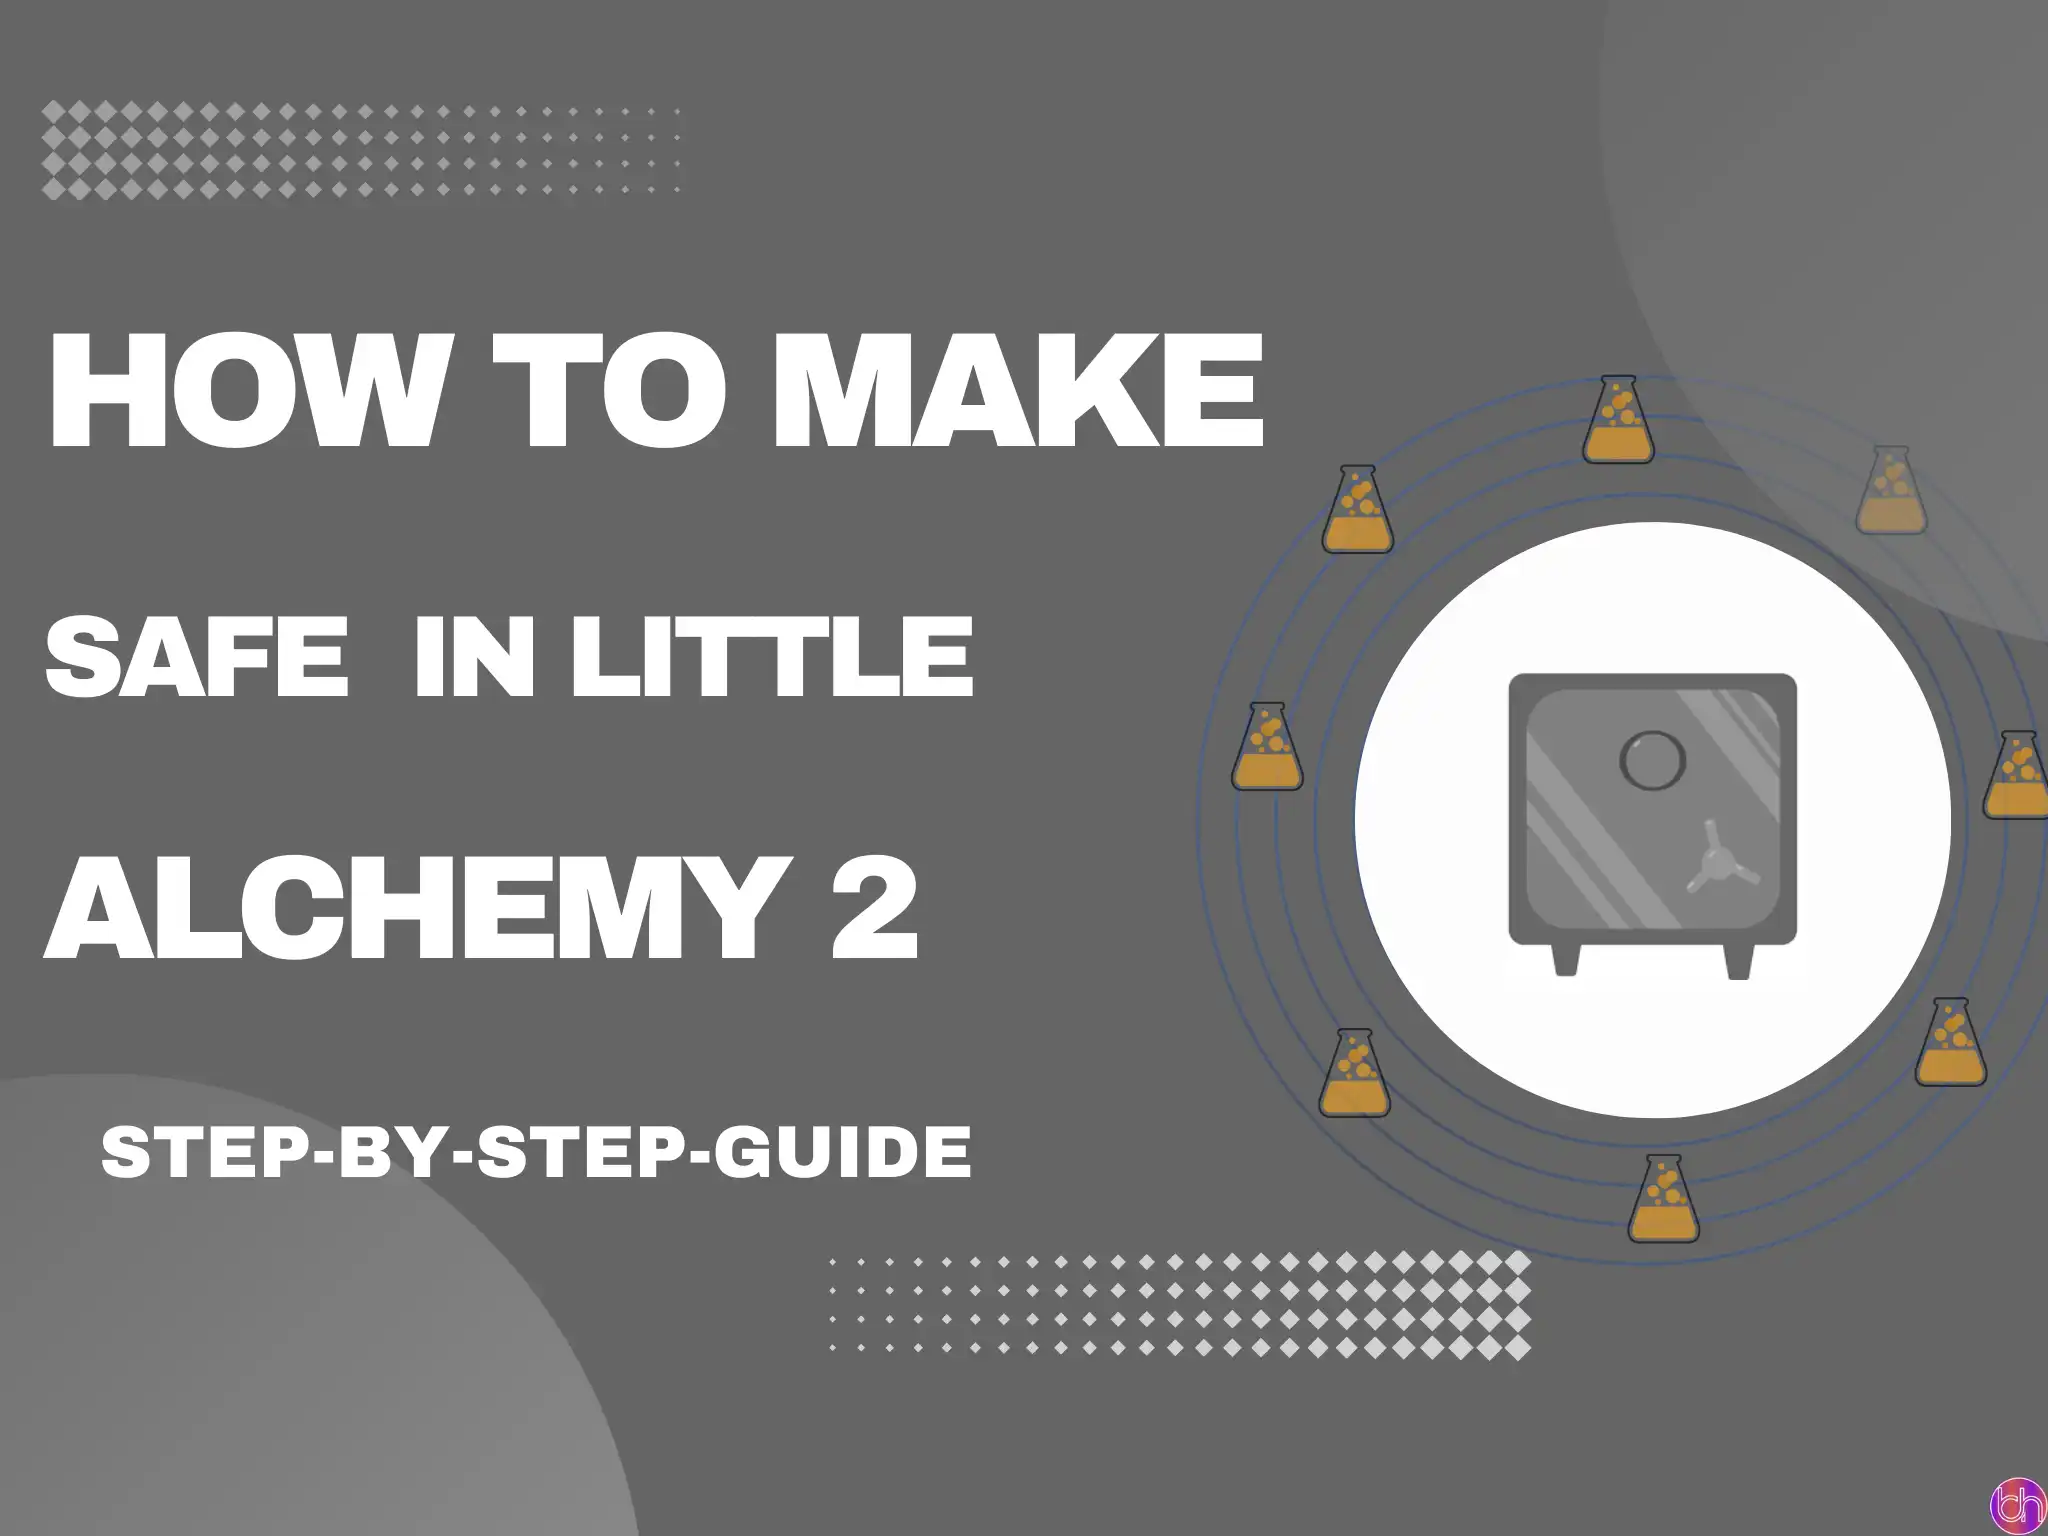 How to make Safe in Little Alchemy 2